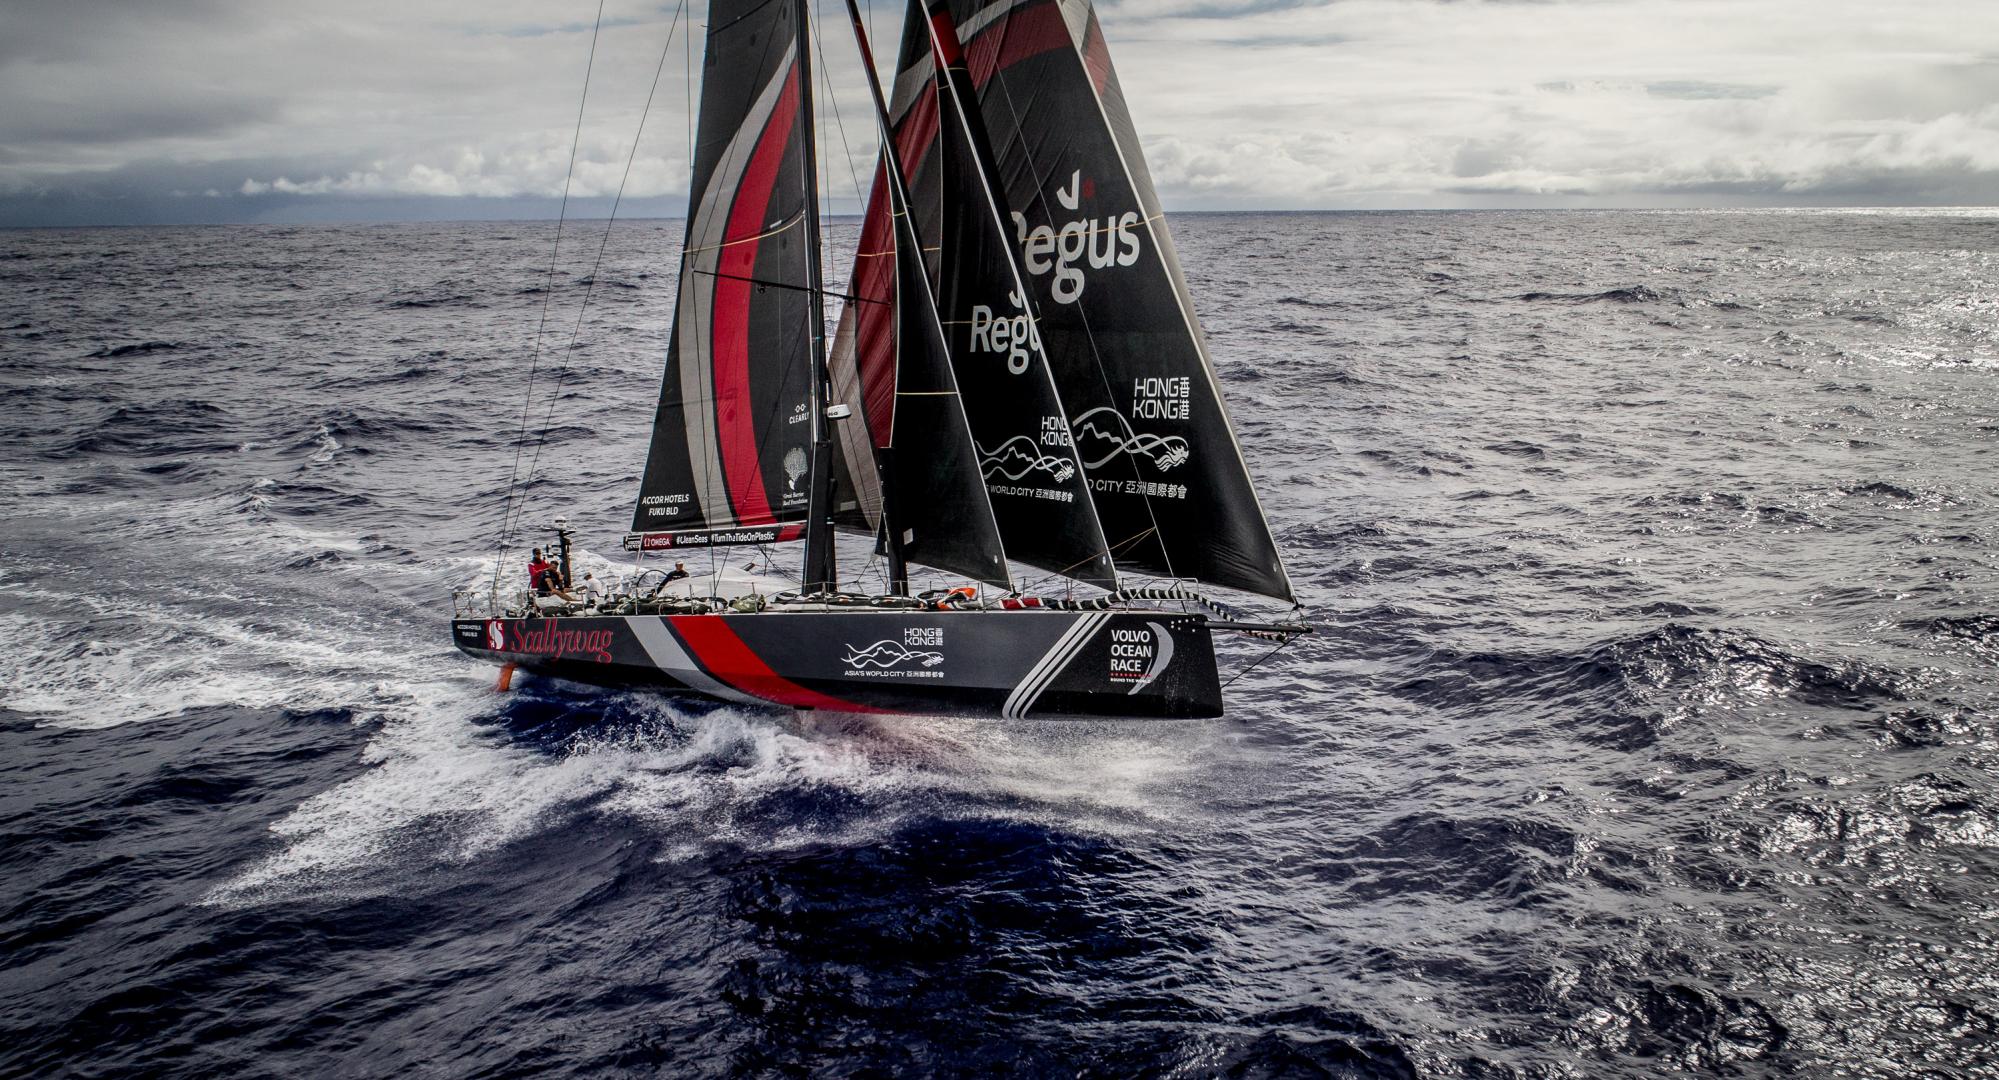 Leg 4, Melbourne to Hong Kong, day 15 The sea state has changed and the boat is flying off the waves on board Sun Hung Kai/Scallywag